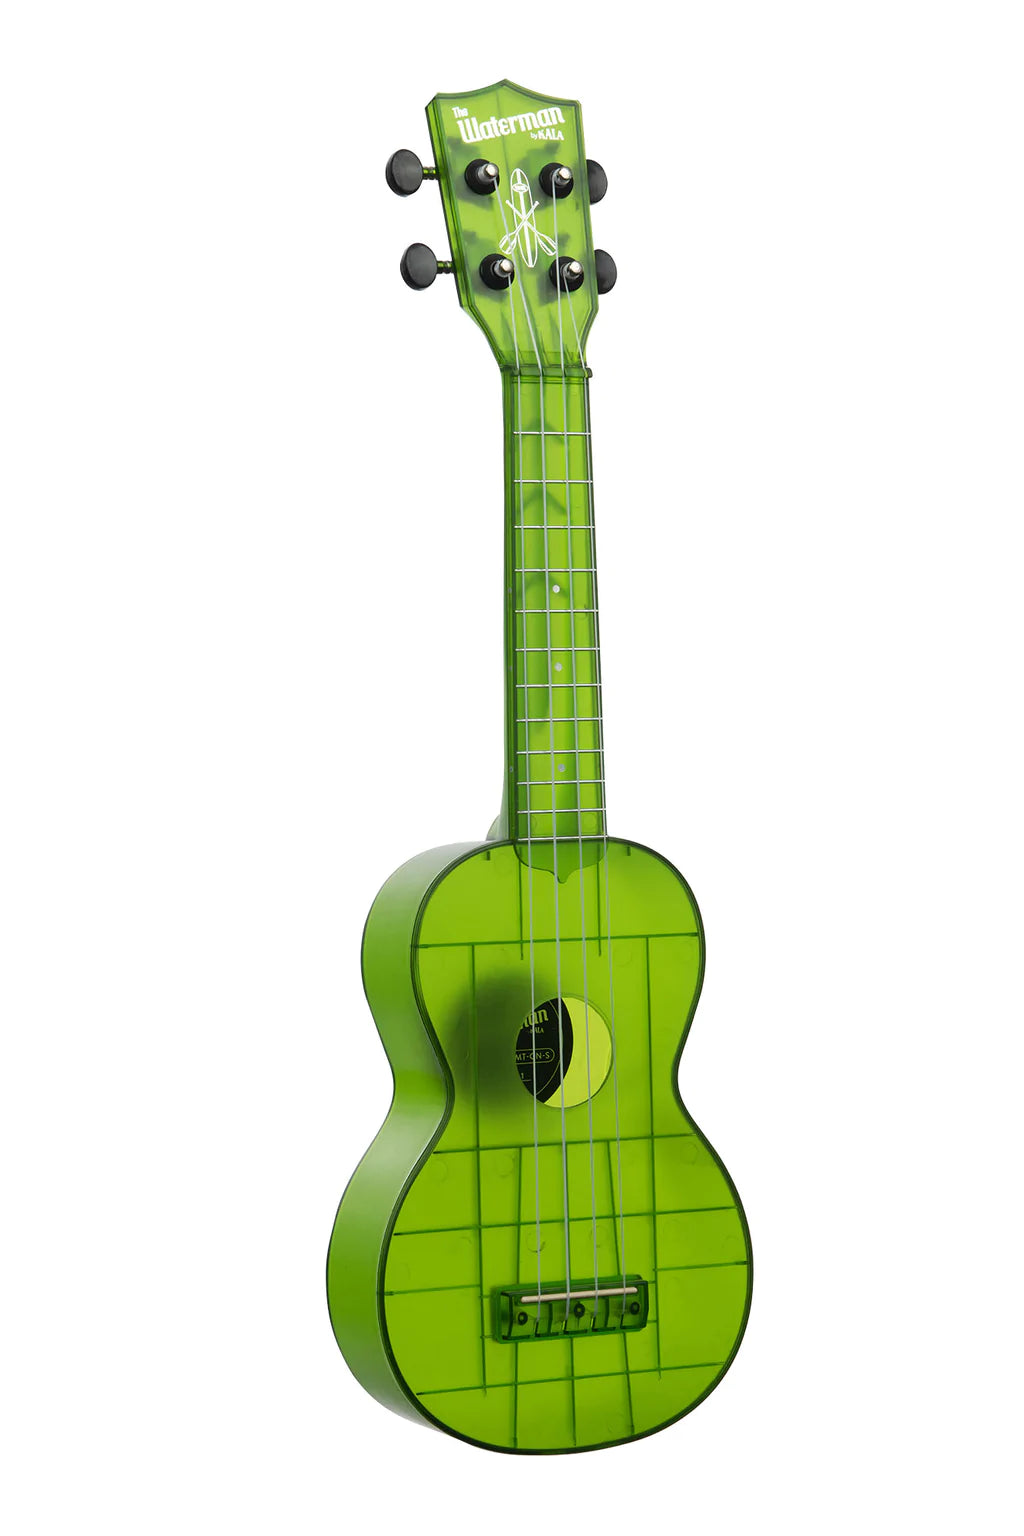 Transparent Jade Green: Learn to Play The Waterman Ukulele by Kala